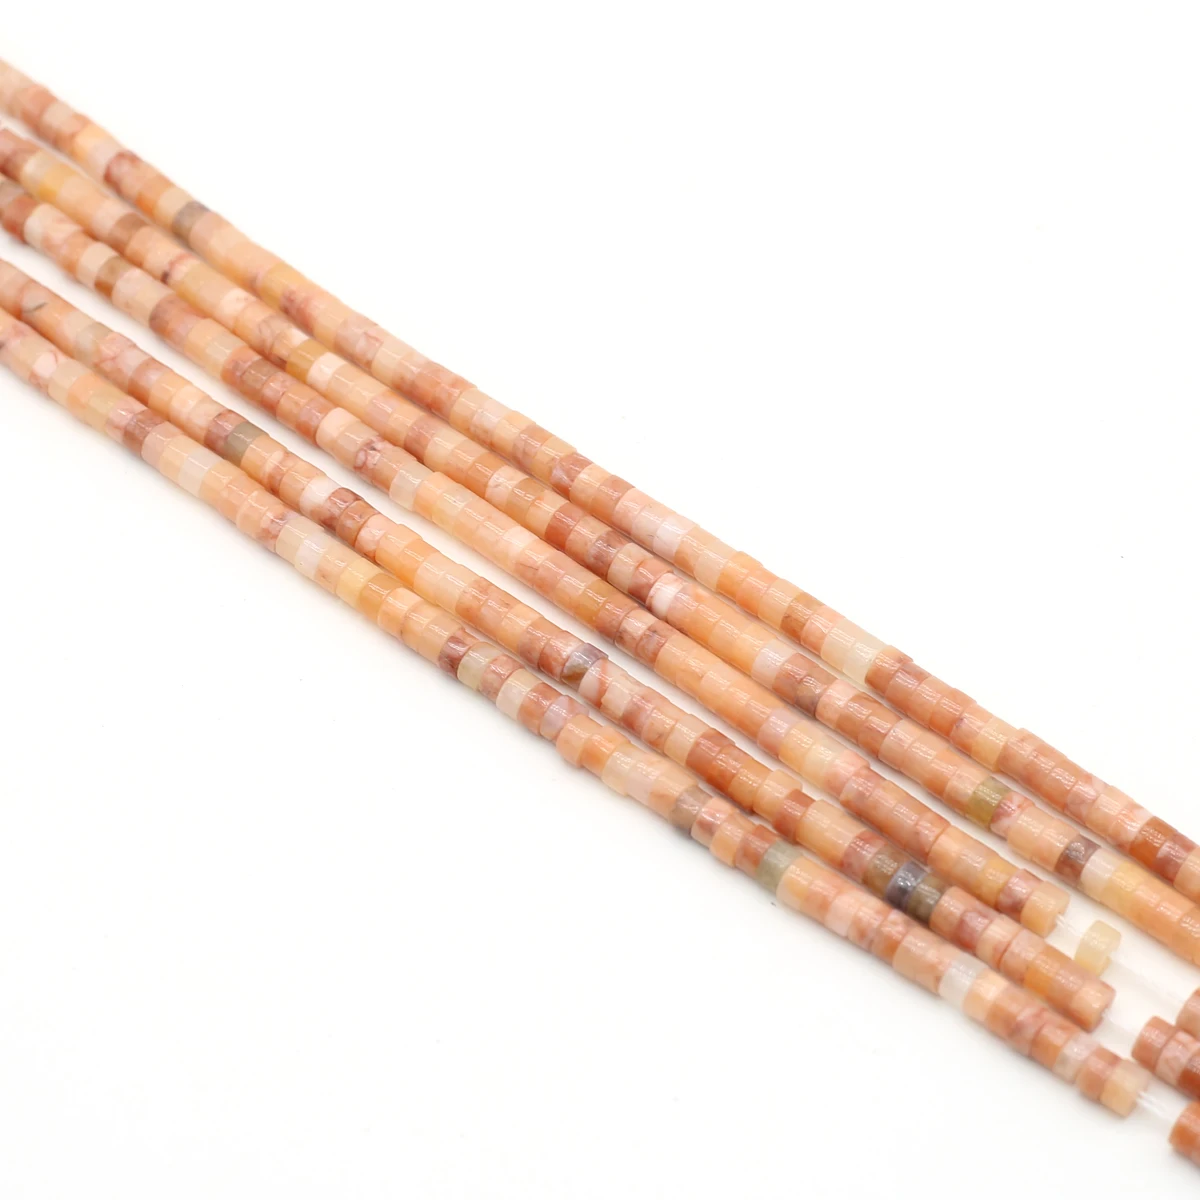 

Faceted Natural Stone Red Aventurine Beads 2x4mm Cylindrical Through Hole Loose Spacer Beads for Jewelry Making DIY Accessories